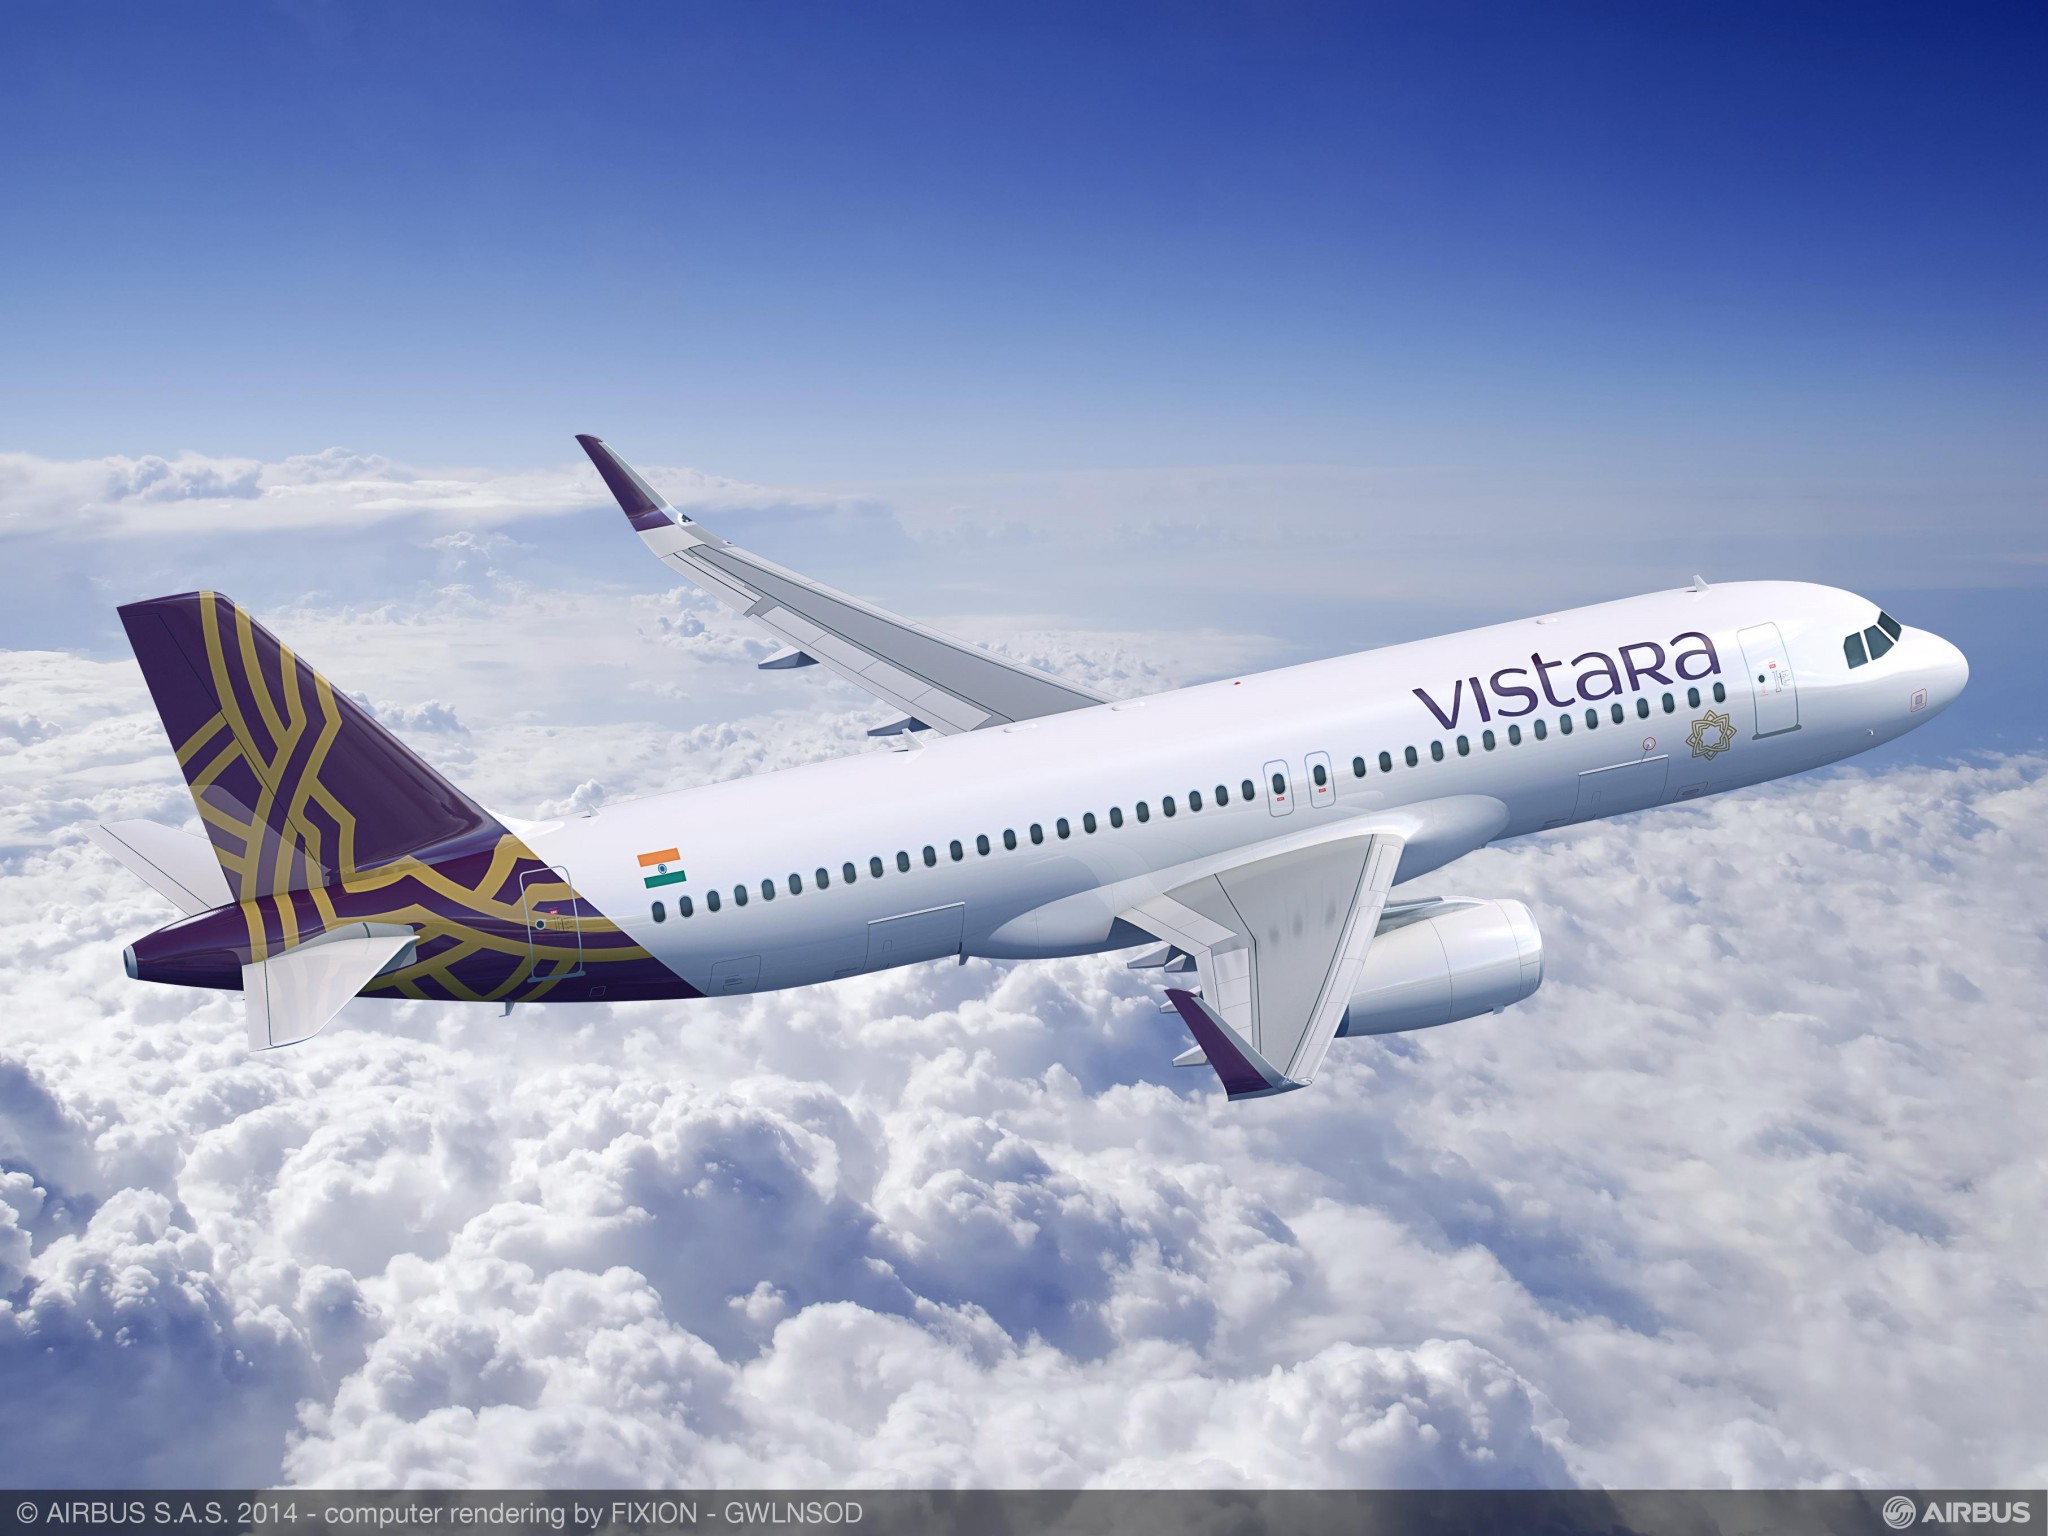 Is a merger of Vistara and Air India on the cards?